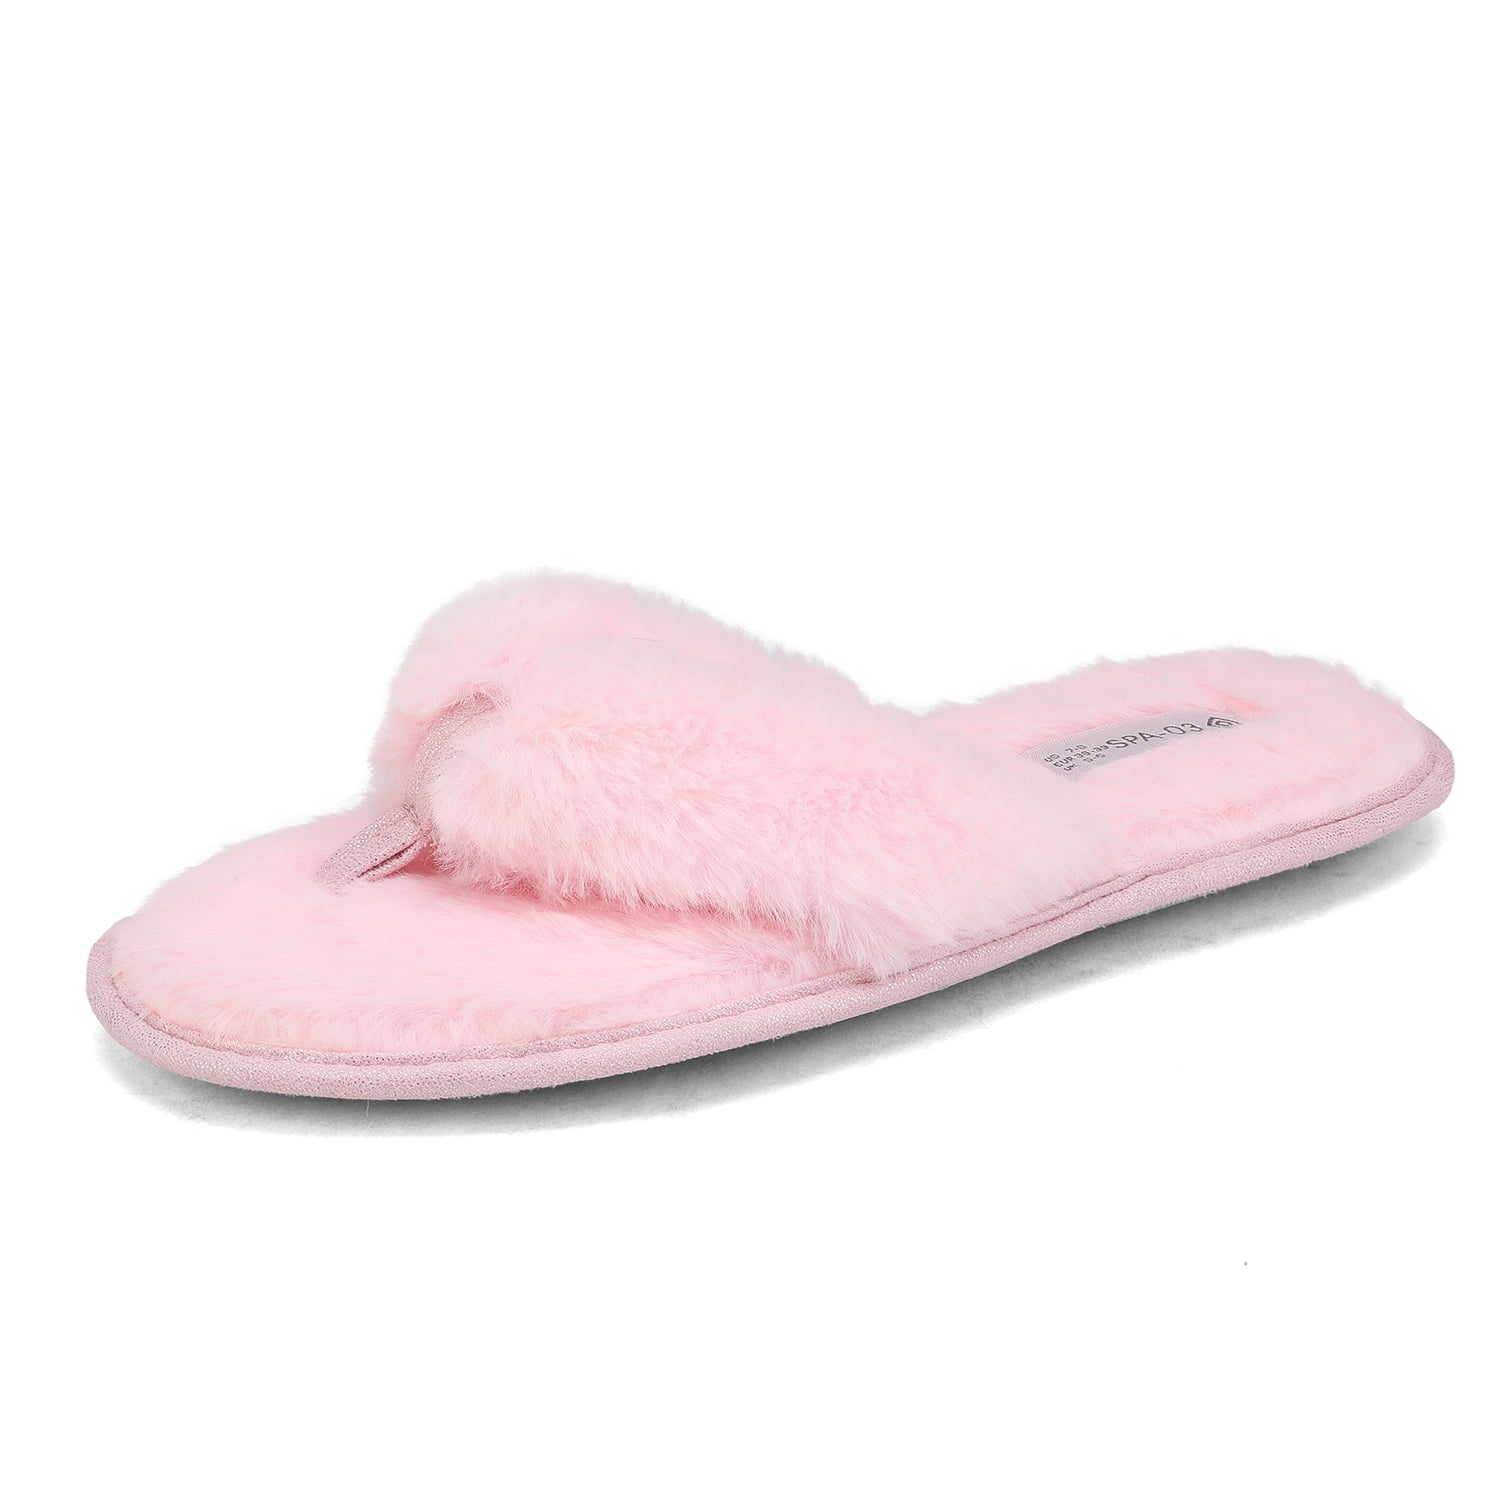 DREAM PAIRS Womens Soft Fuzzy Flip Flop Slip on Indoor House Slippers